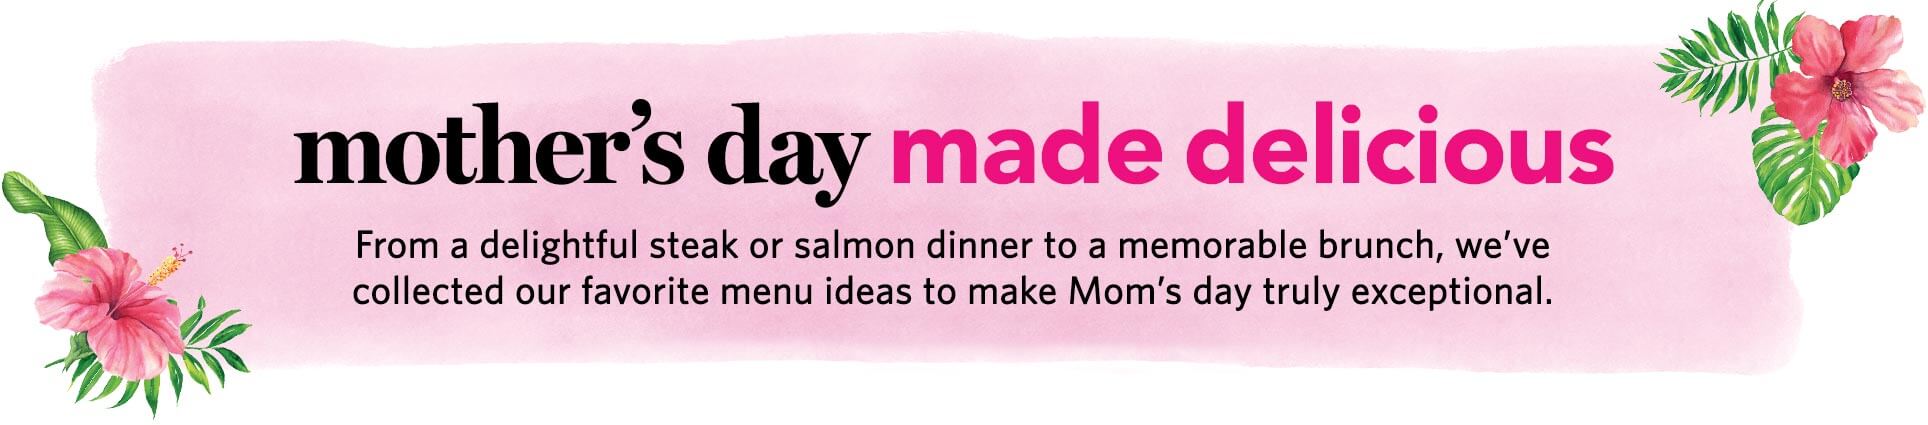 mother’s day made delicious - From a delightful steak or salmon dinner, to a memorable brunch, we’ve collected our favorite menu ideas to make mom’s day truly exceptional.